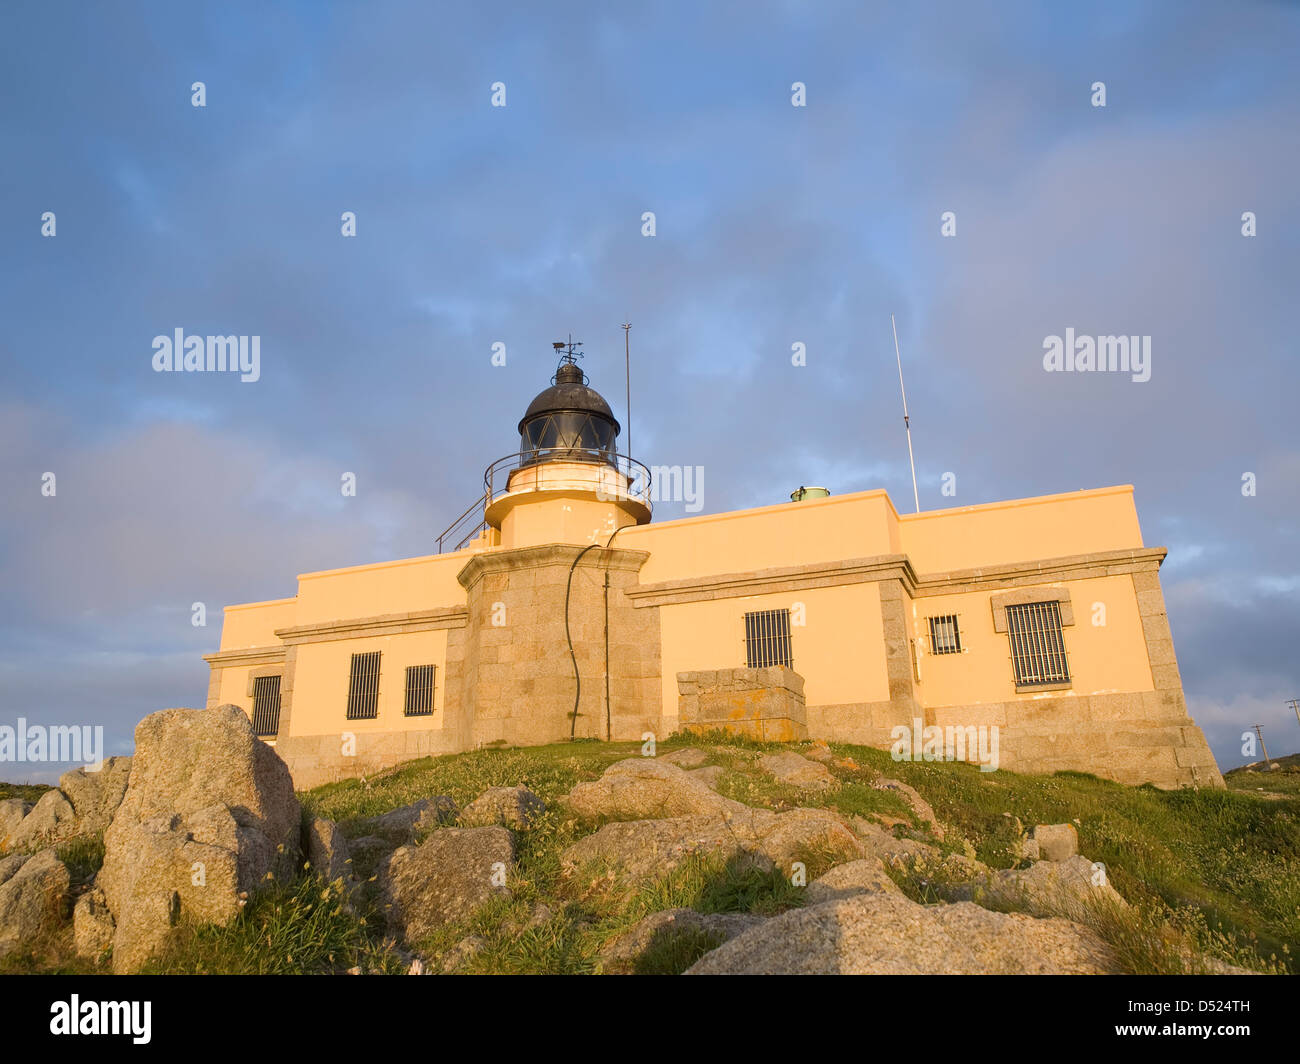 Lighthouse built on a building at sunset. Lighthouse built on a building at sunset. The lighthouse is bathed in evening light an Stock Photo